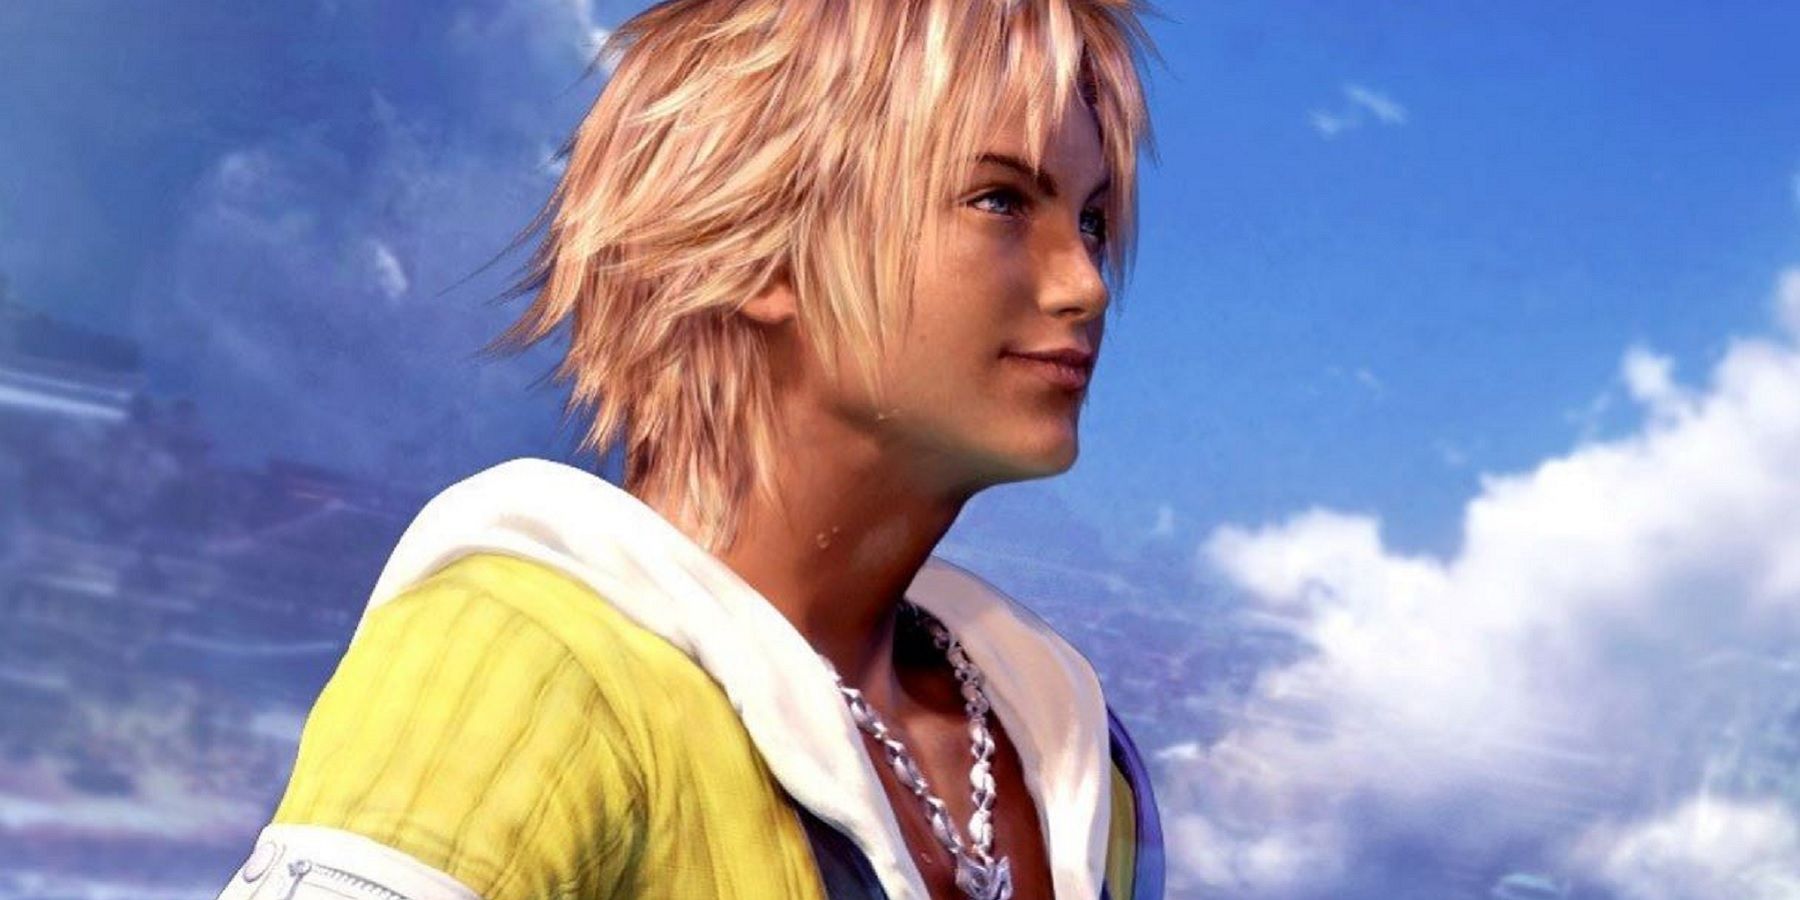 Final Fantasy X Remake reportedly in development for 2026 launch